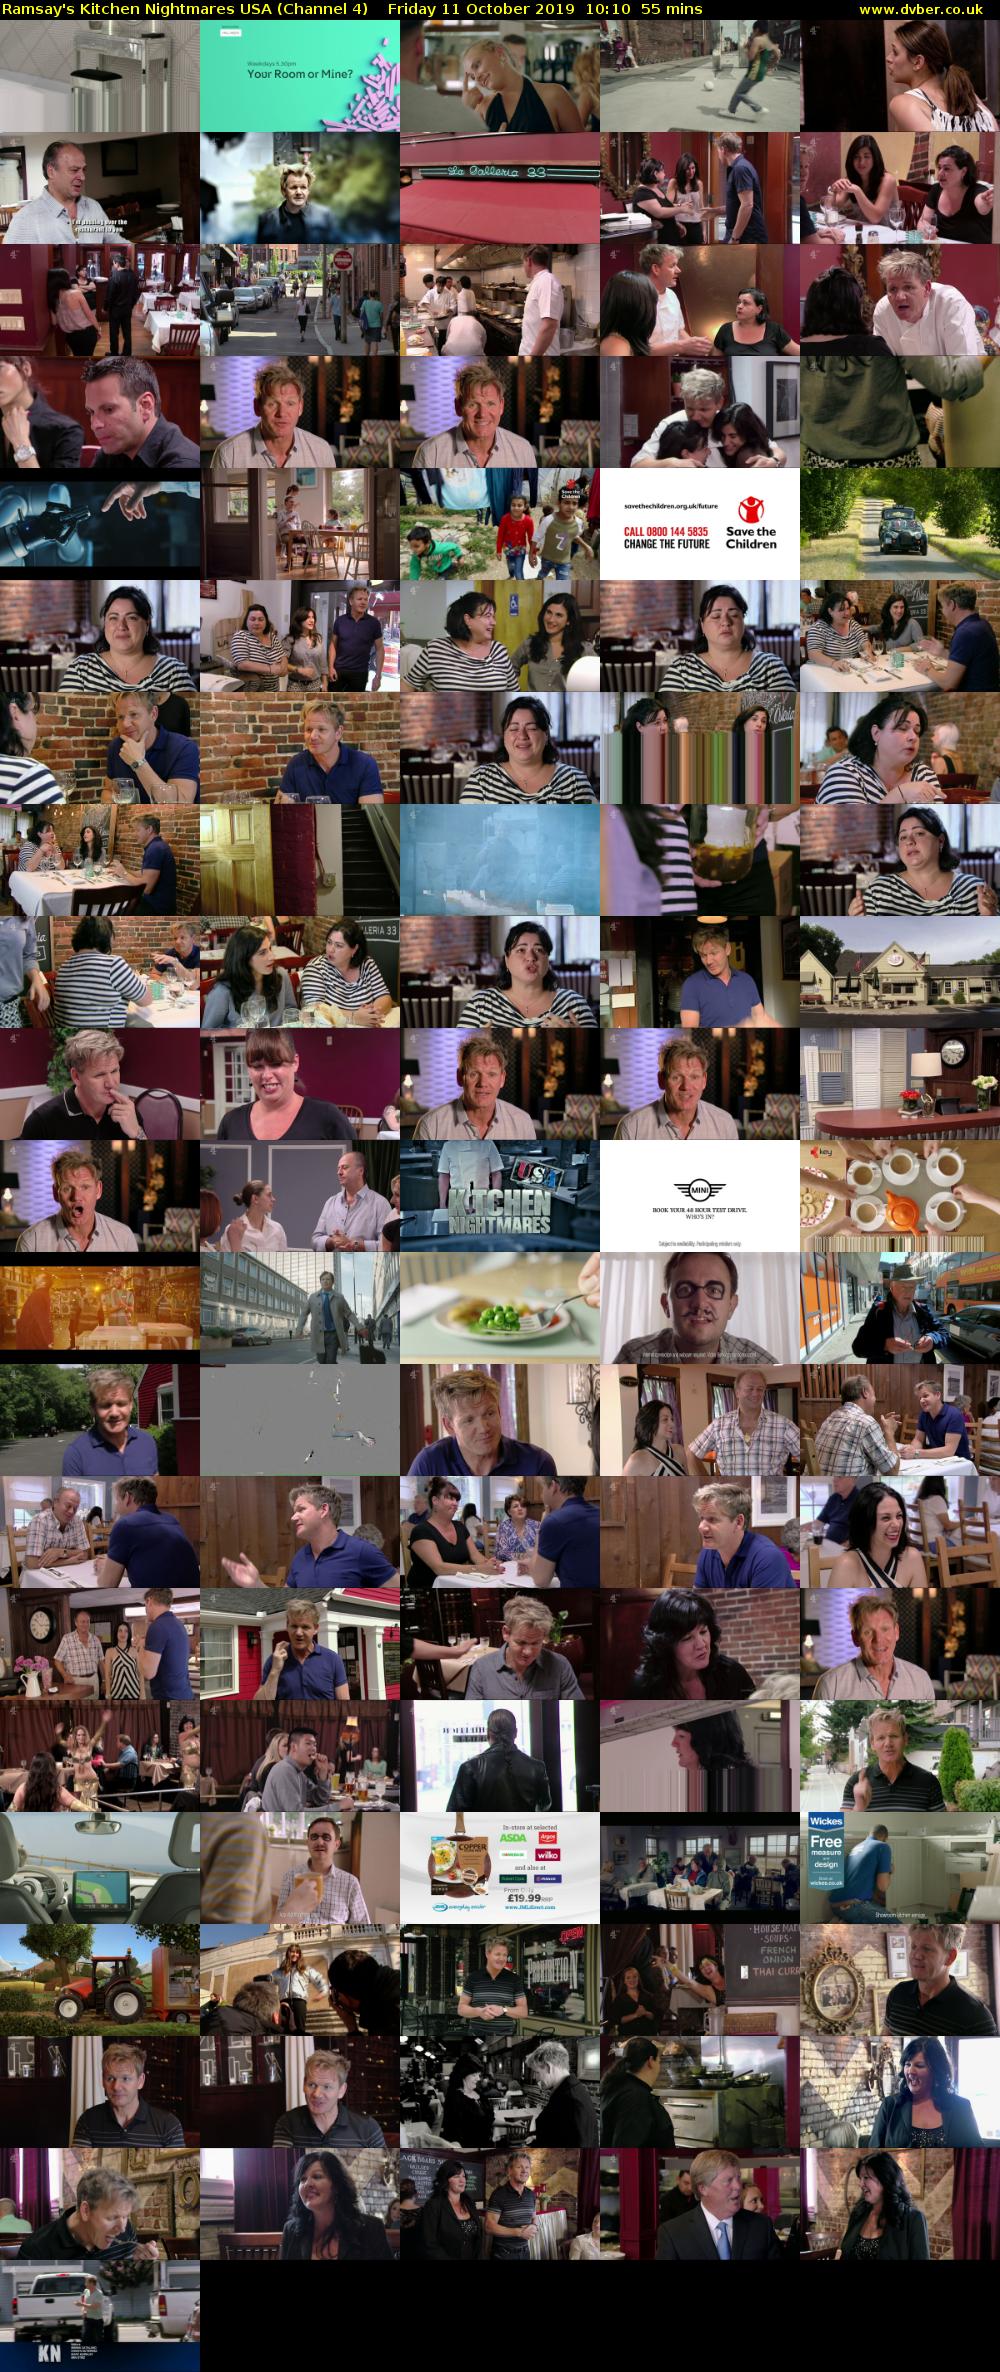 Ramsay's Kitchen Nightmares USA (Channel 4) Friday 11 October 2019 10:10 - 11:05